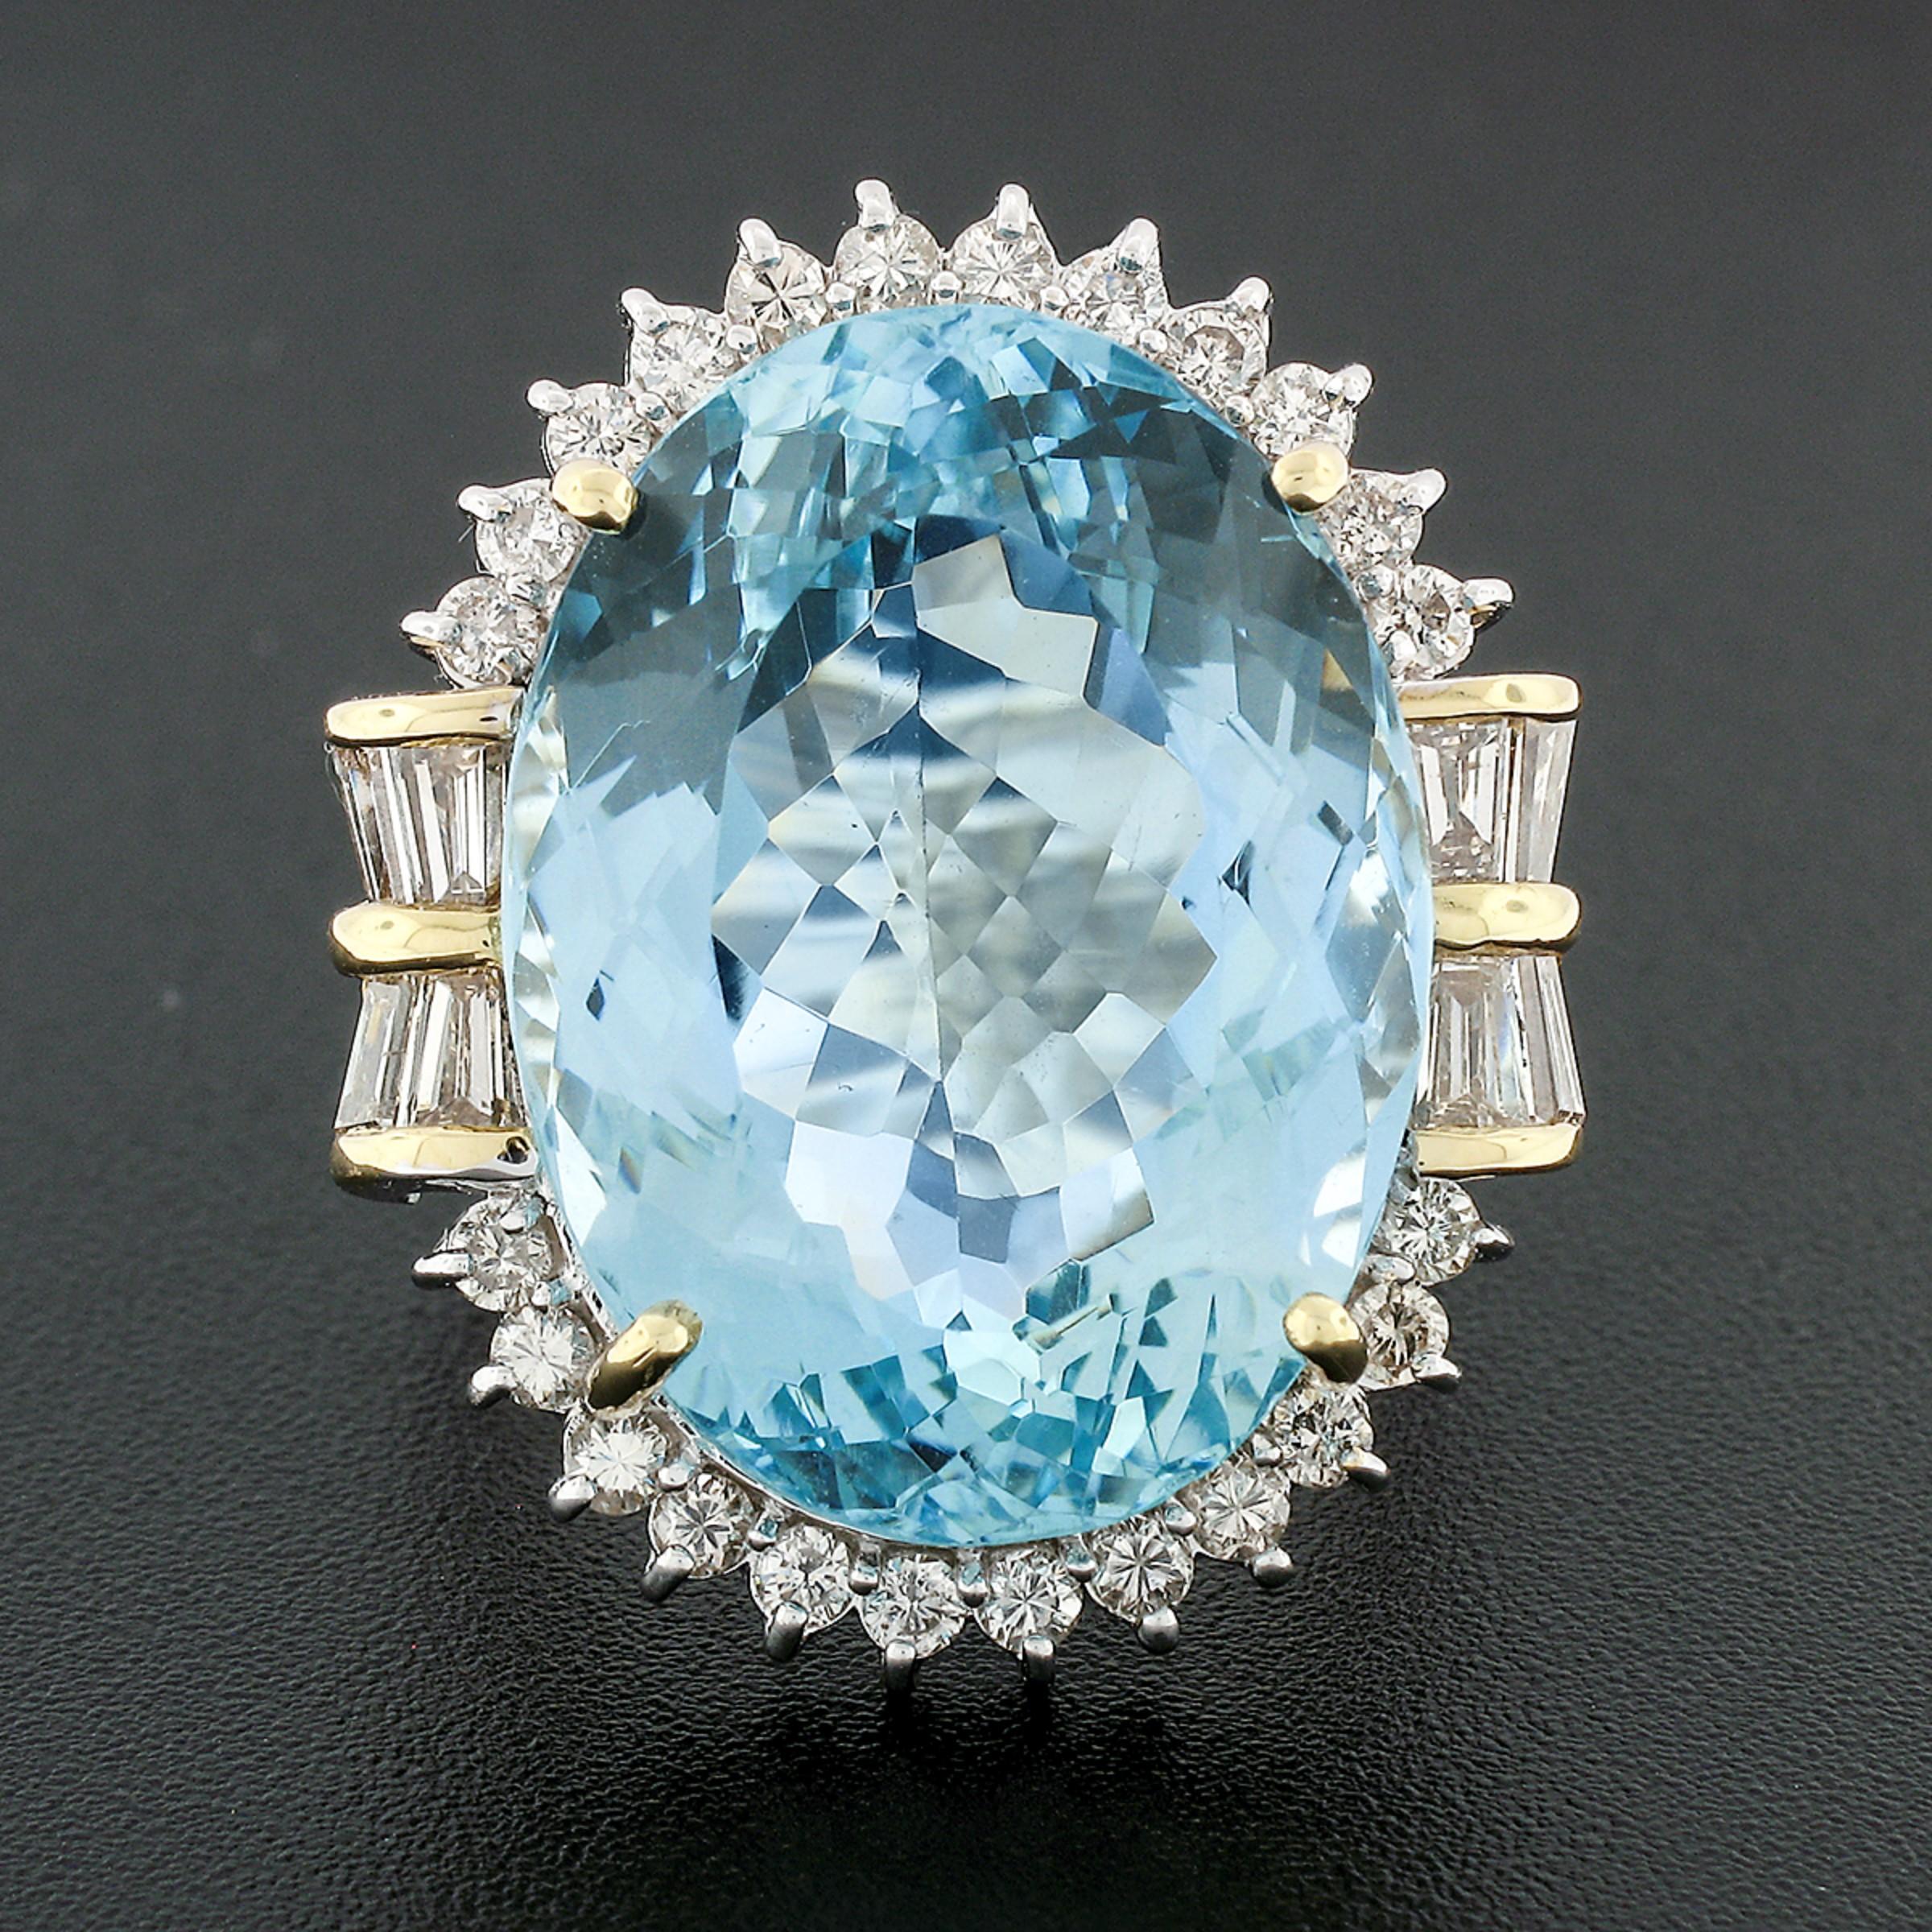 -- Item Details --

Material: 	Solid 18k Yellow & White Gold
Weight: 	16.11 Grams
-- Stone(s):
(1) Natural Genuine Aquamarine - Prong Set - Most Attractive Ocean Blue Color - 26.26 carats (exact - stamped)
*See Certification Information Below*
(24)